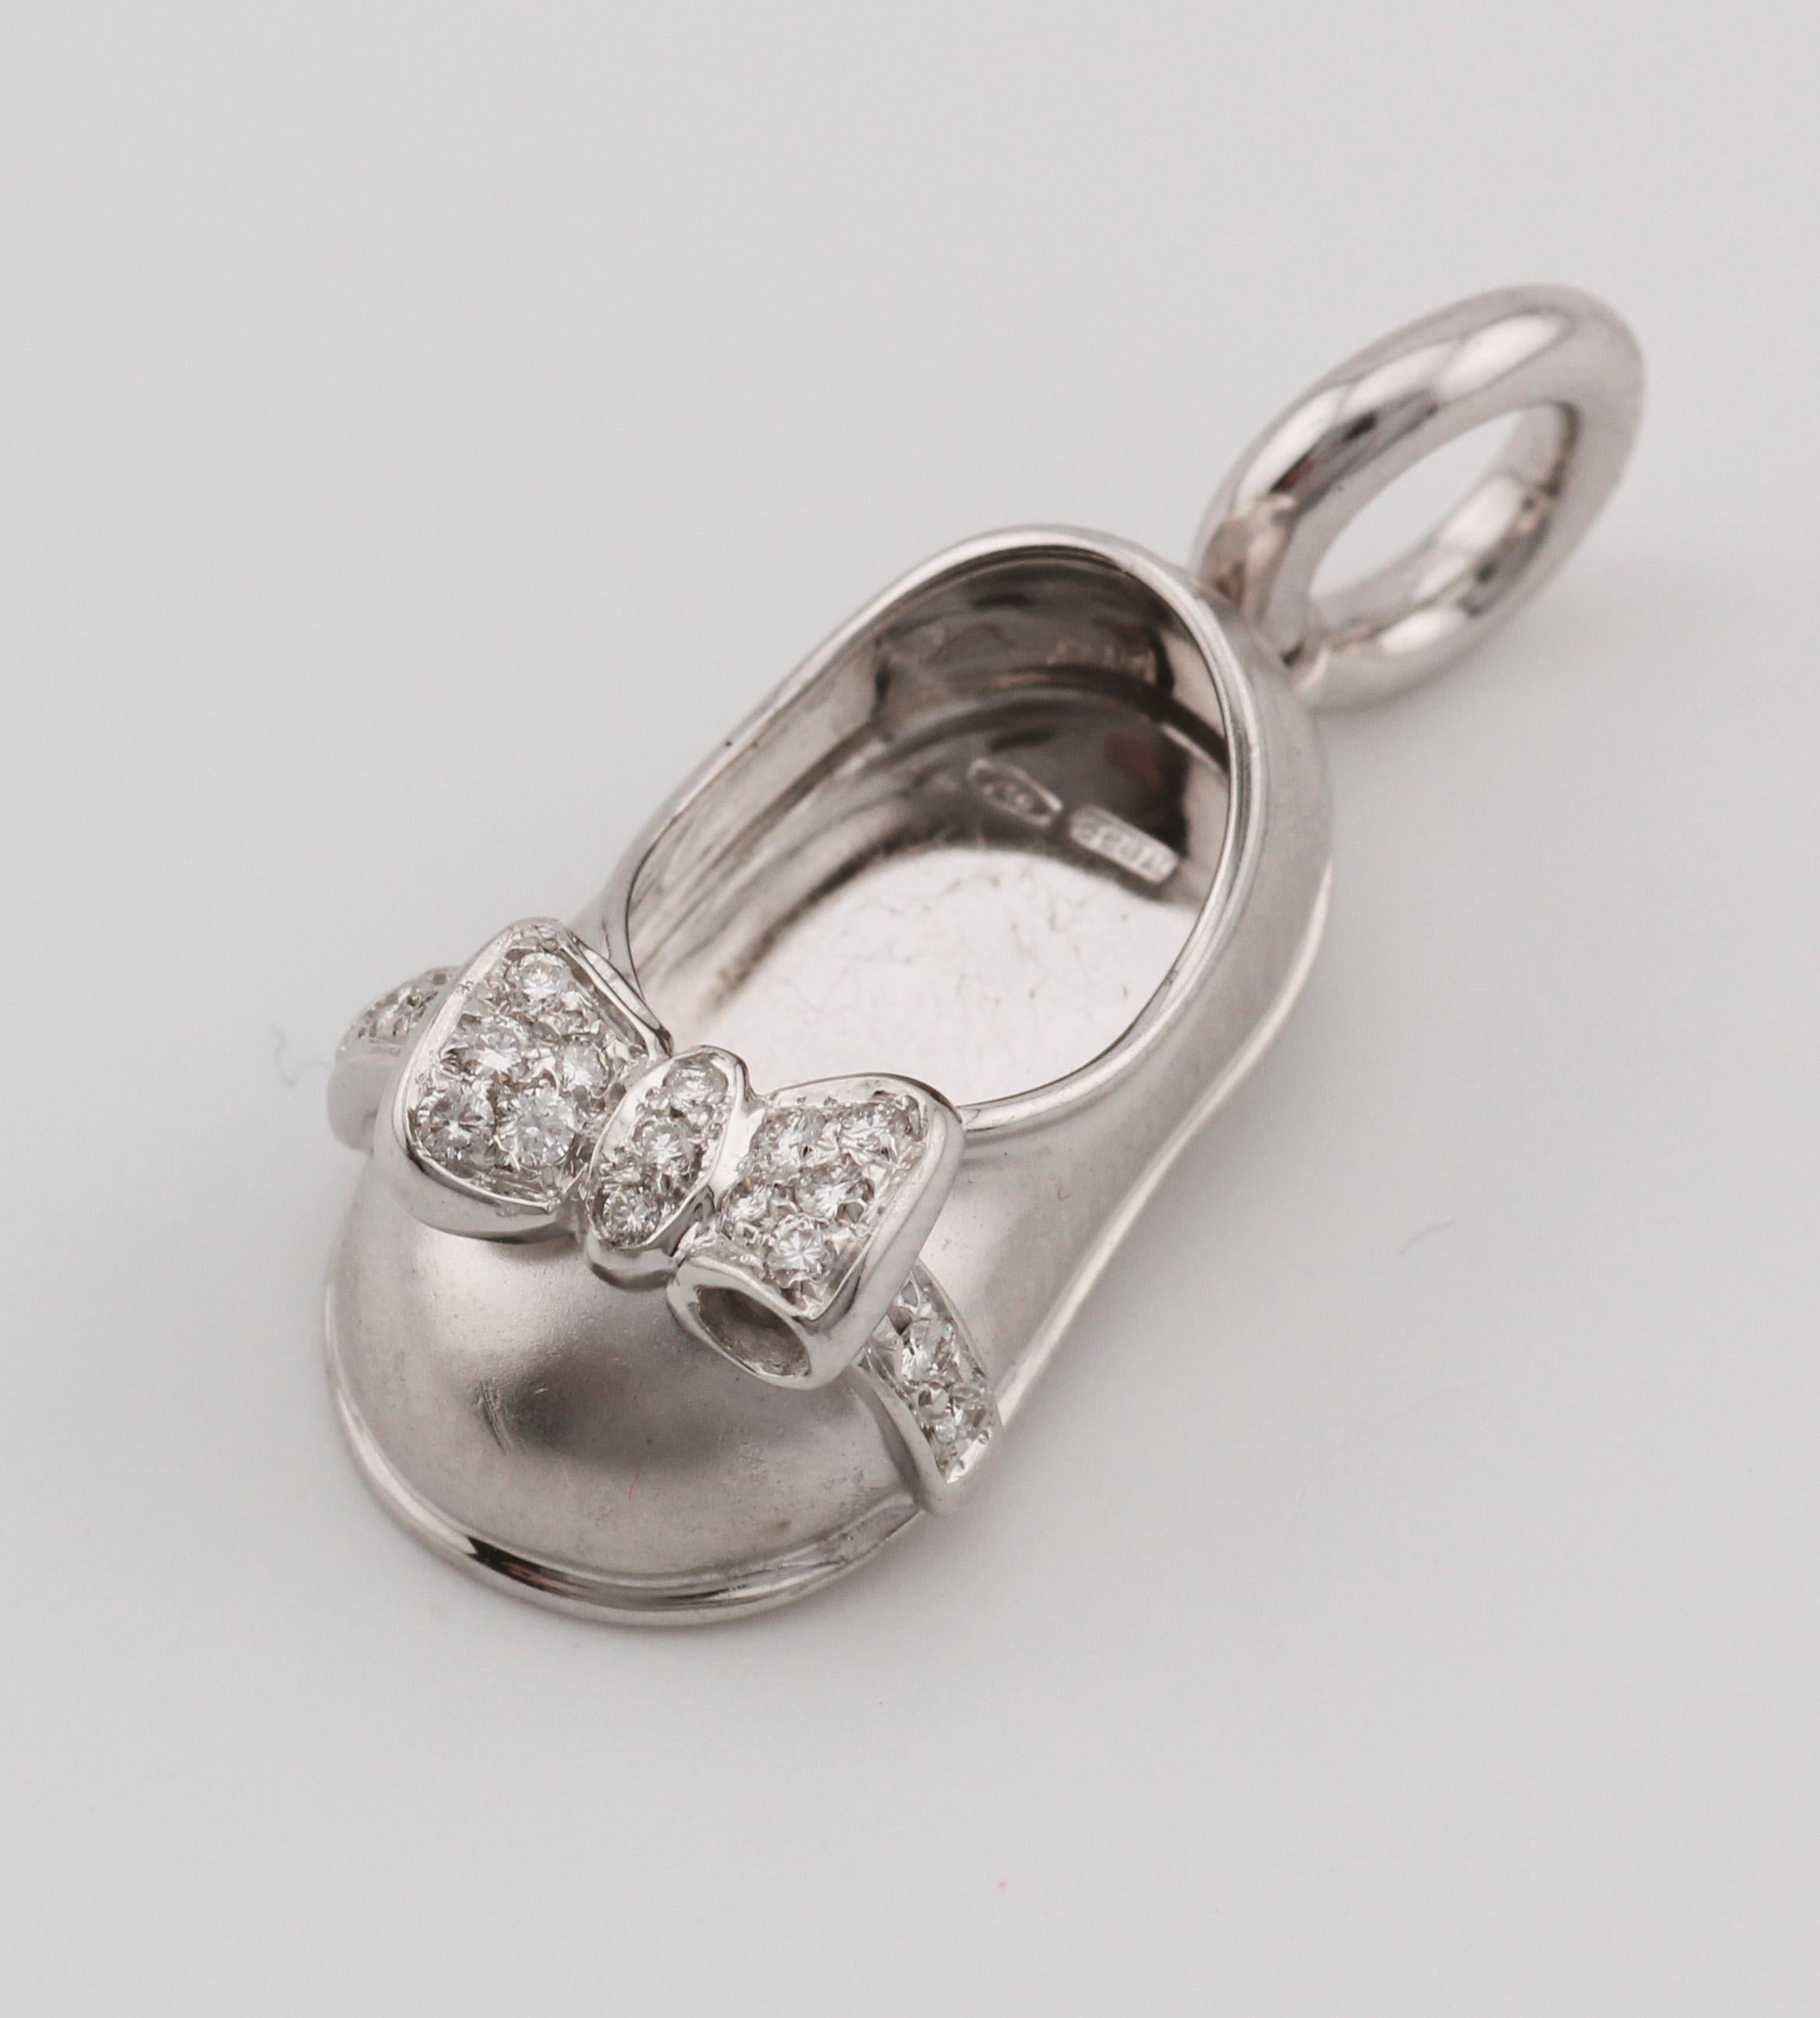 The Aaron Basha Diamond 18K White Gold Baby Girl Shoe Charm Pendant is a delightful piece of fine jewelry that captures the innocence and charm of infancy. Crafted from luxurious 18K white gold, this pendant features meticulous attention to detail,